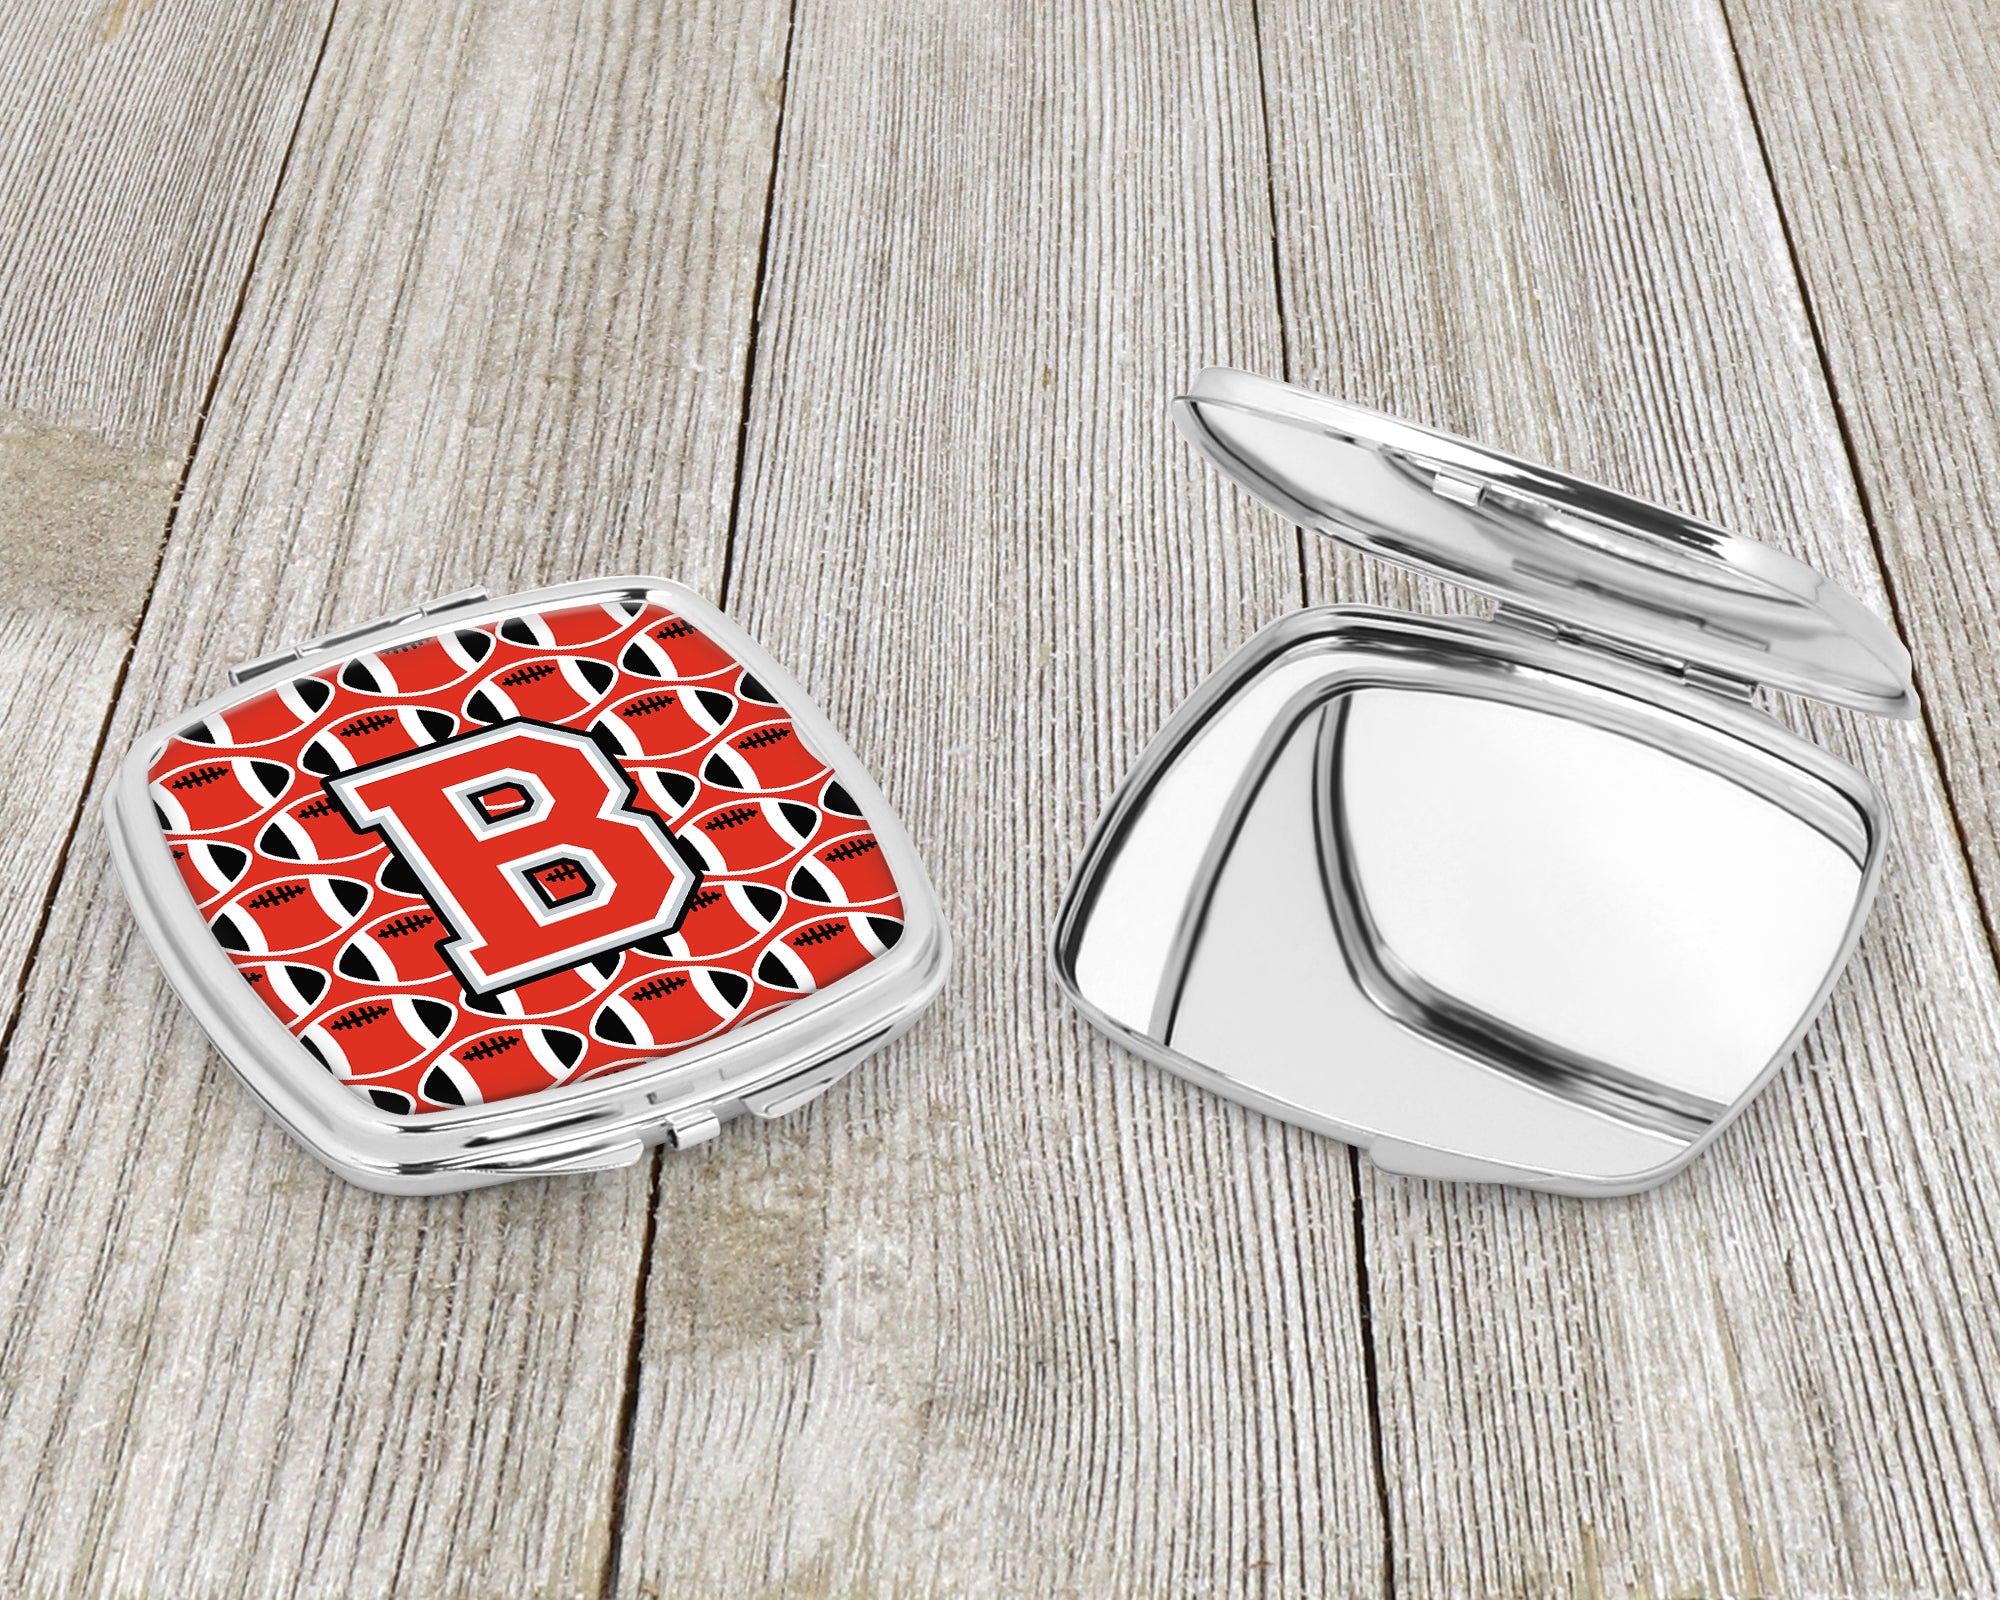 Letter B Football Scarlet and Grey Compact Mirror CJ1067-BSCM  the-store.com.